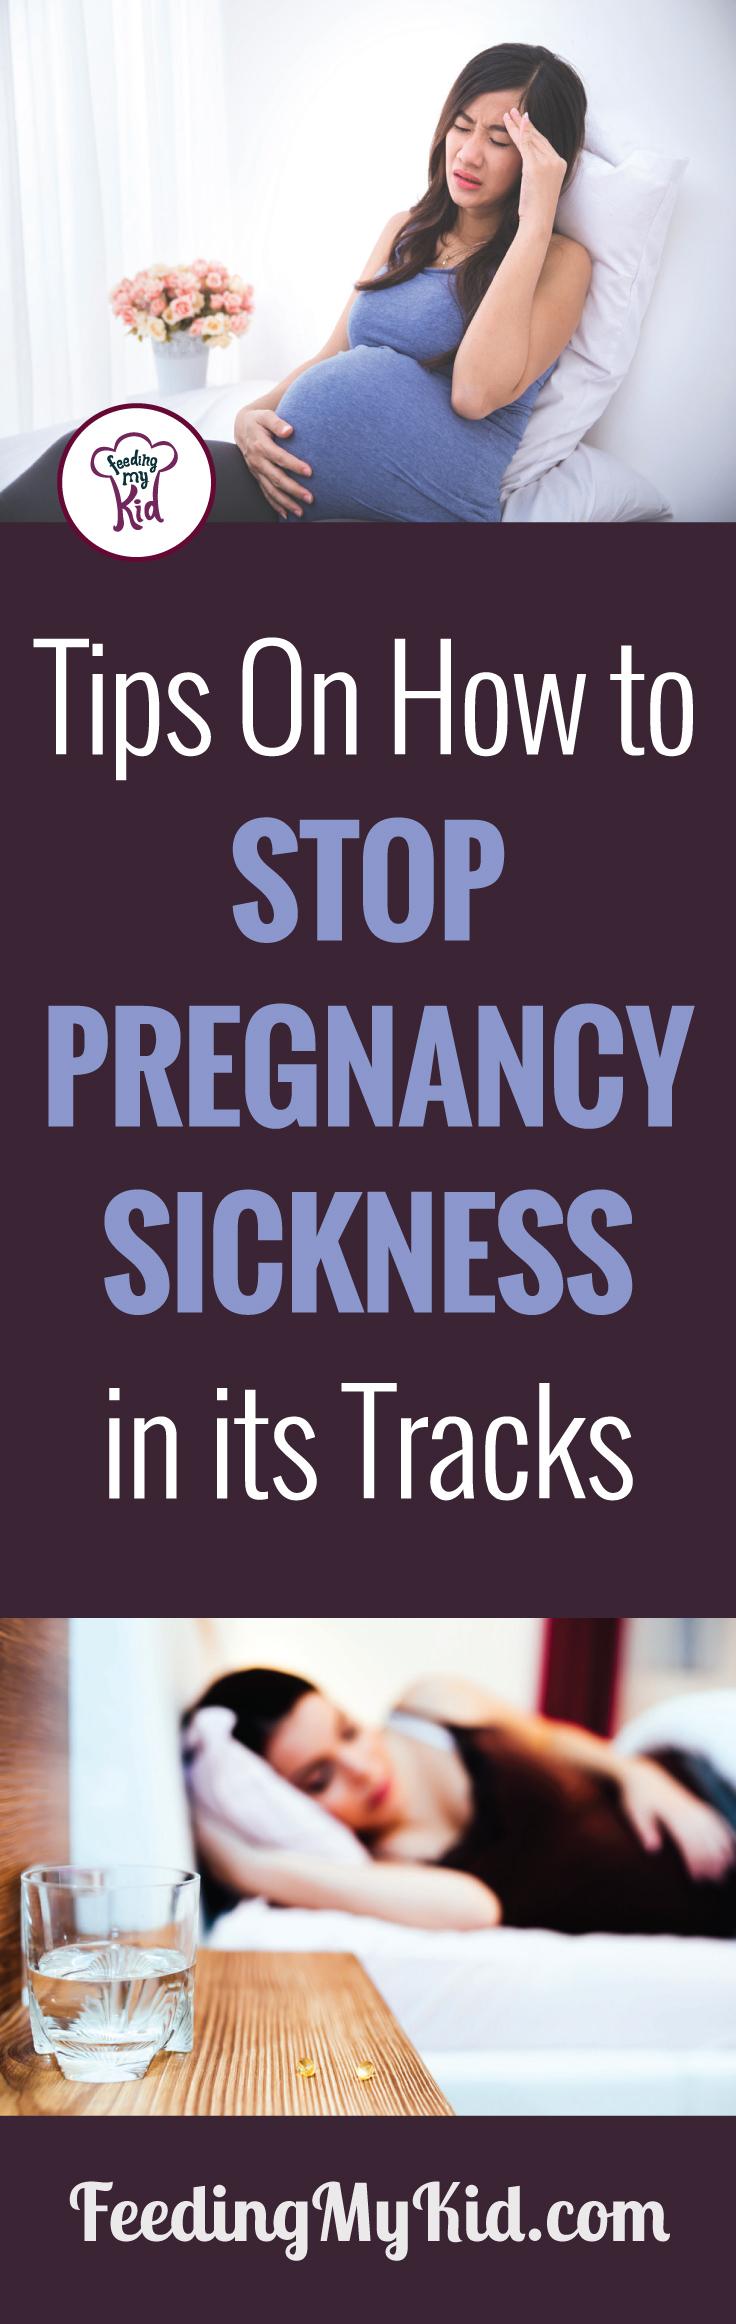 These are simple, helpful hacks and tips to get you through that pregnancy sickness. These tips will help you stay healthy and feel better.